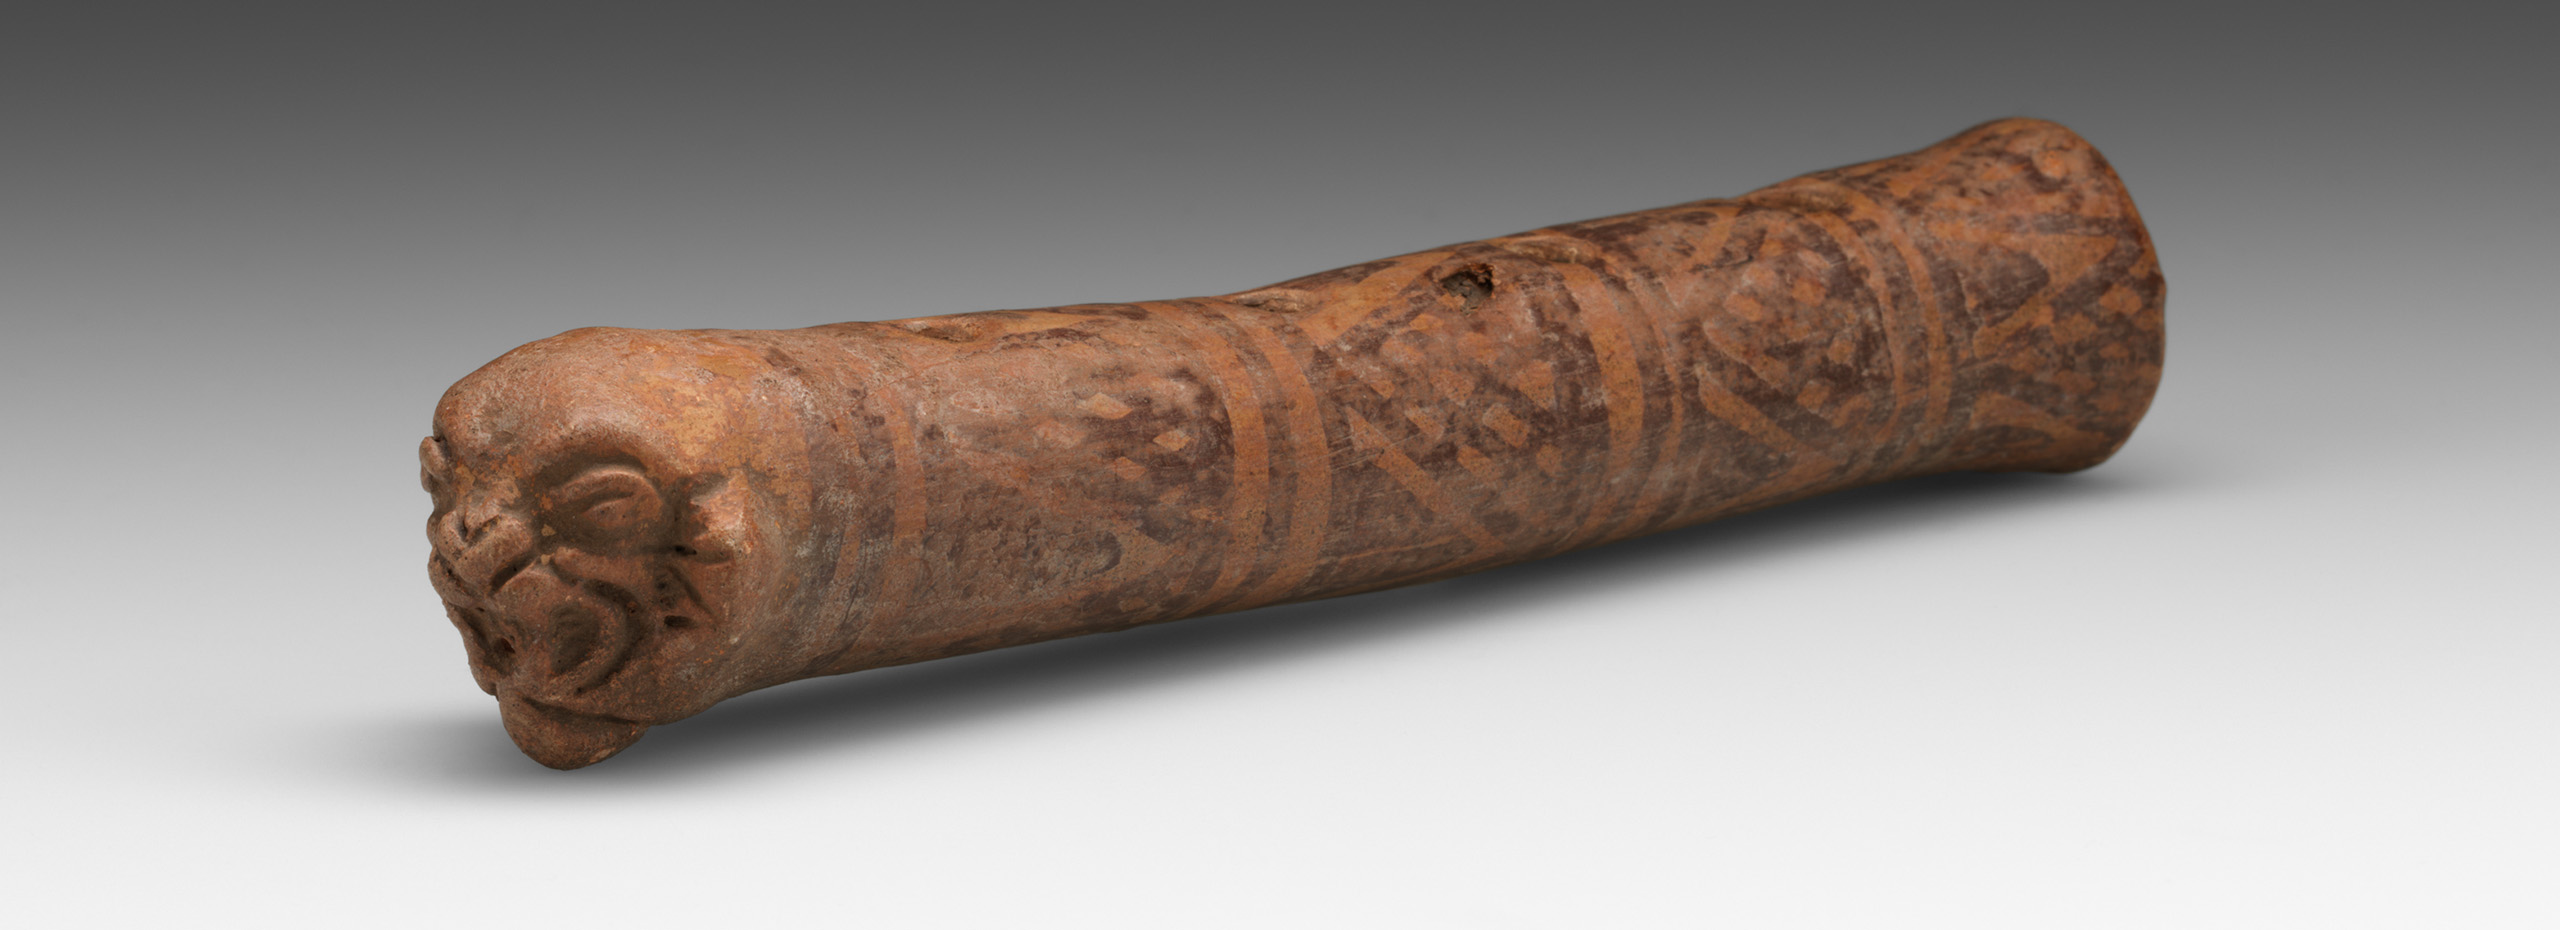 A wood flute carved with an animal face on one end and marked with a geometric pattern